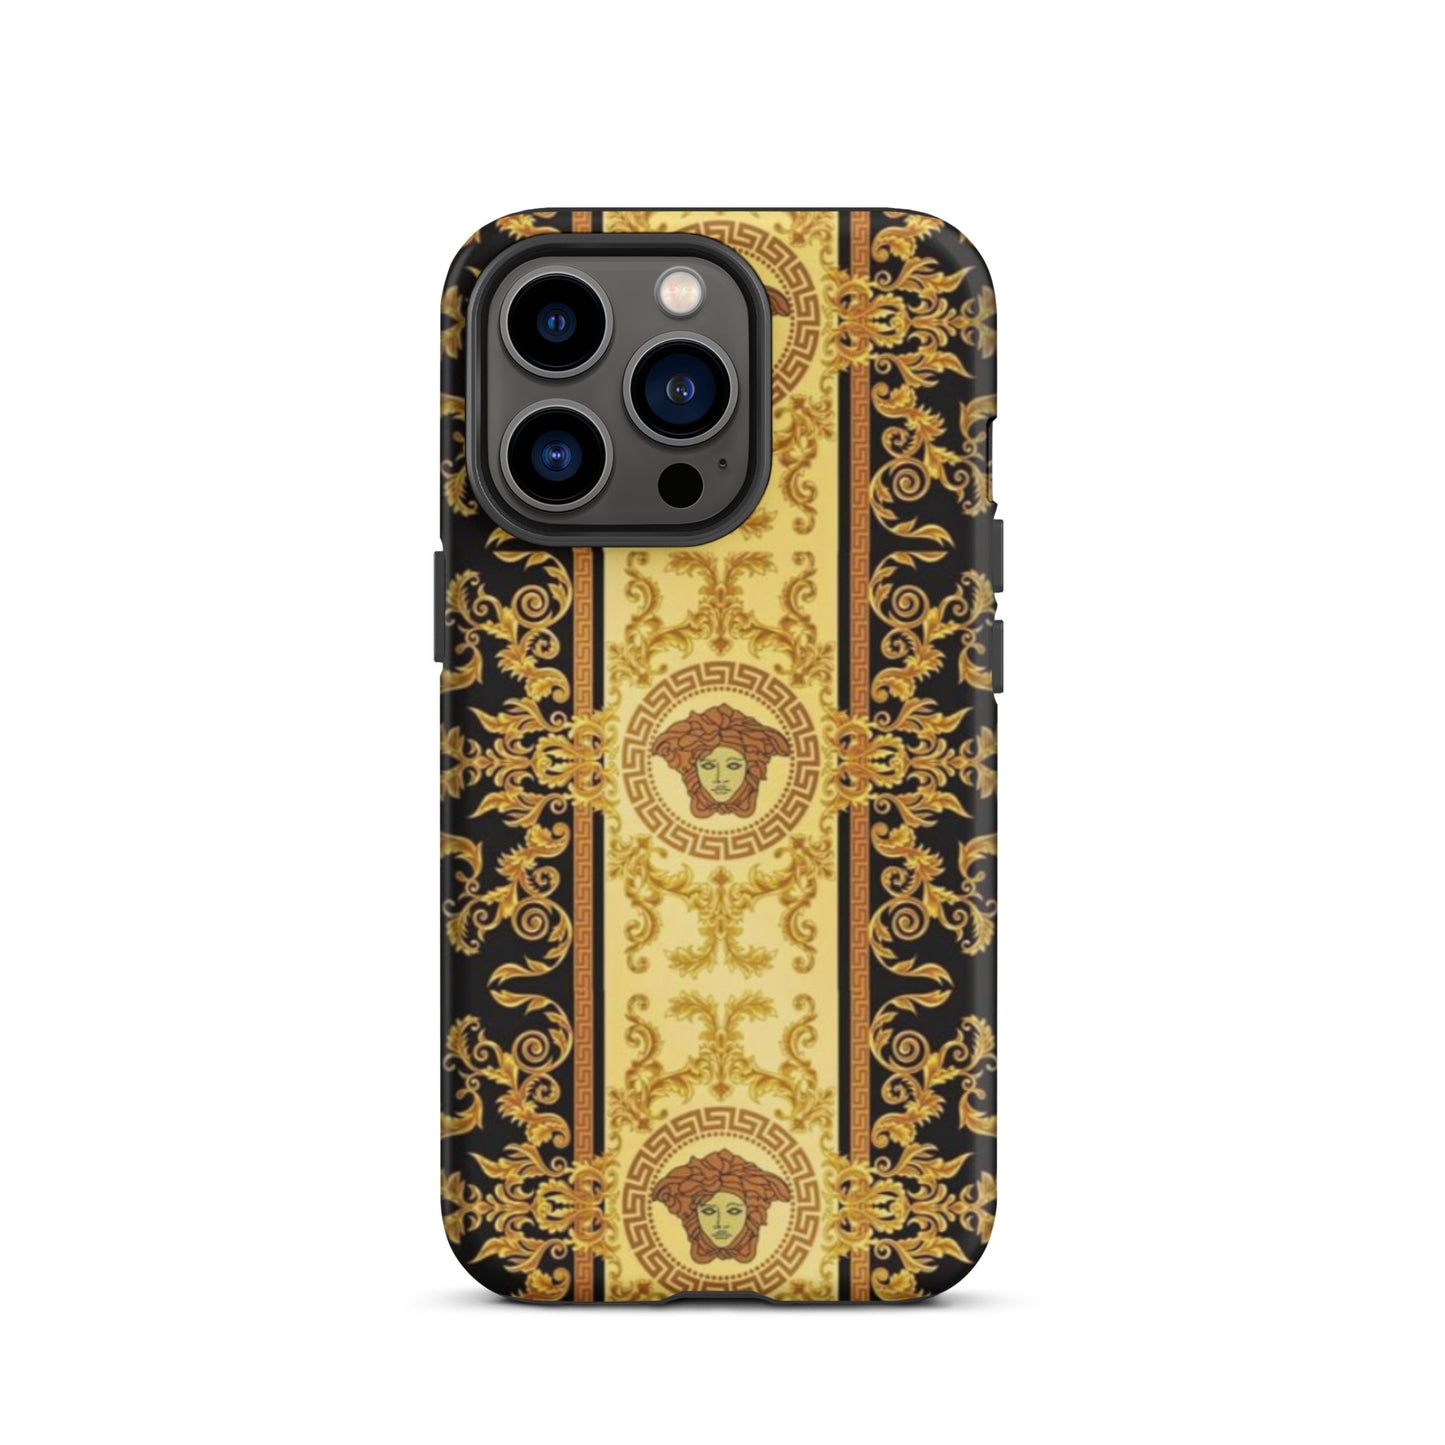 DOPiFiED Tough iPhone case